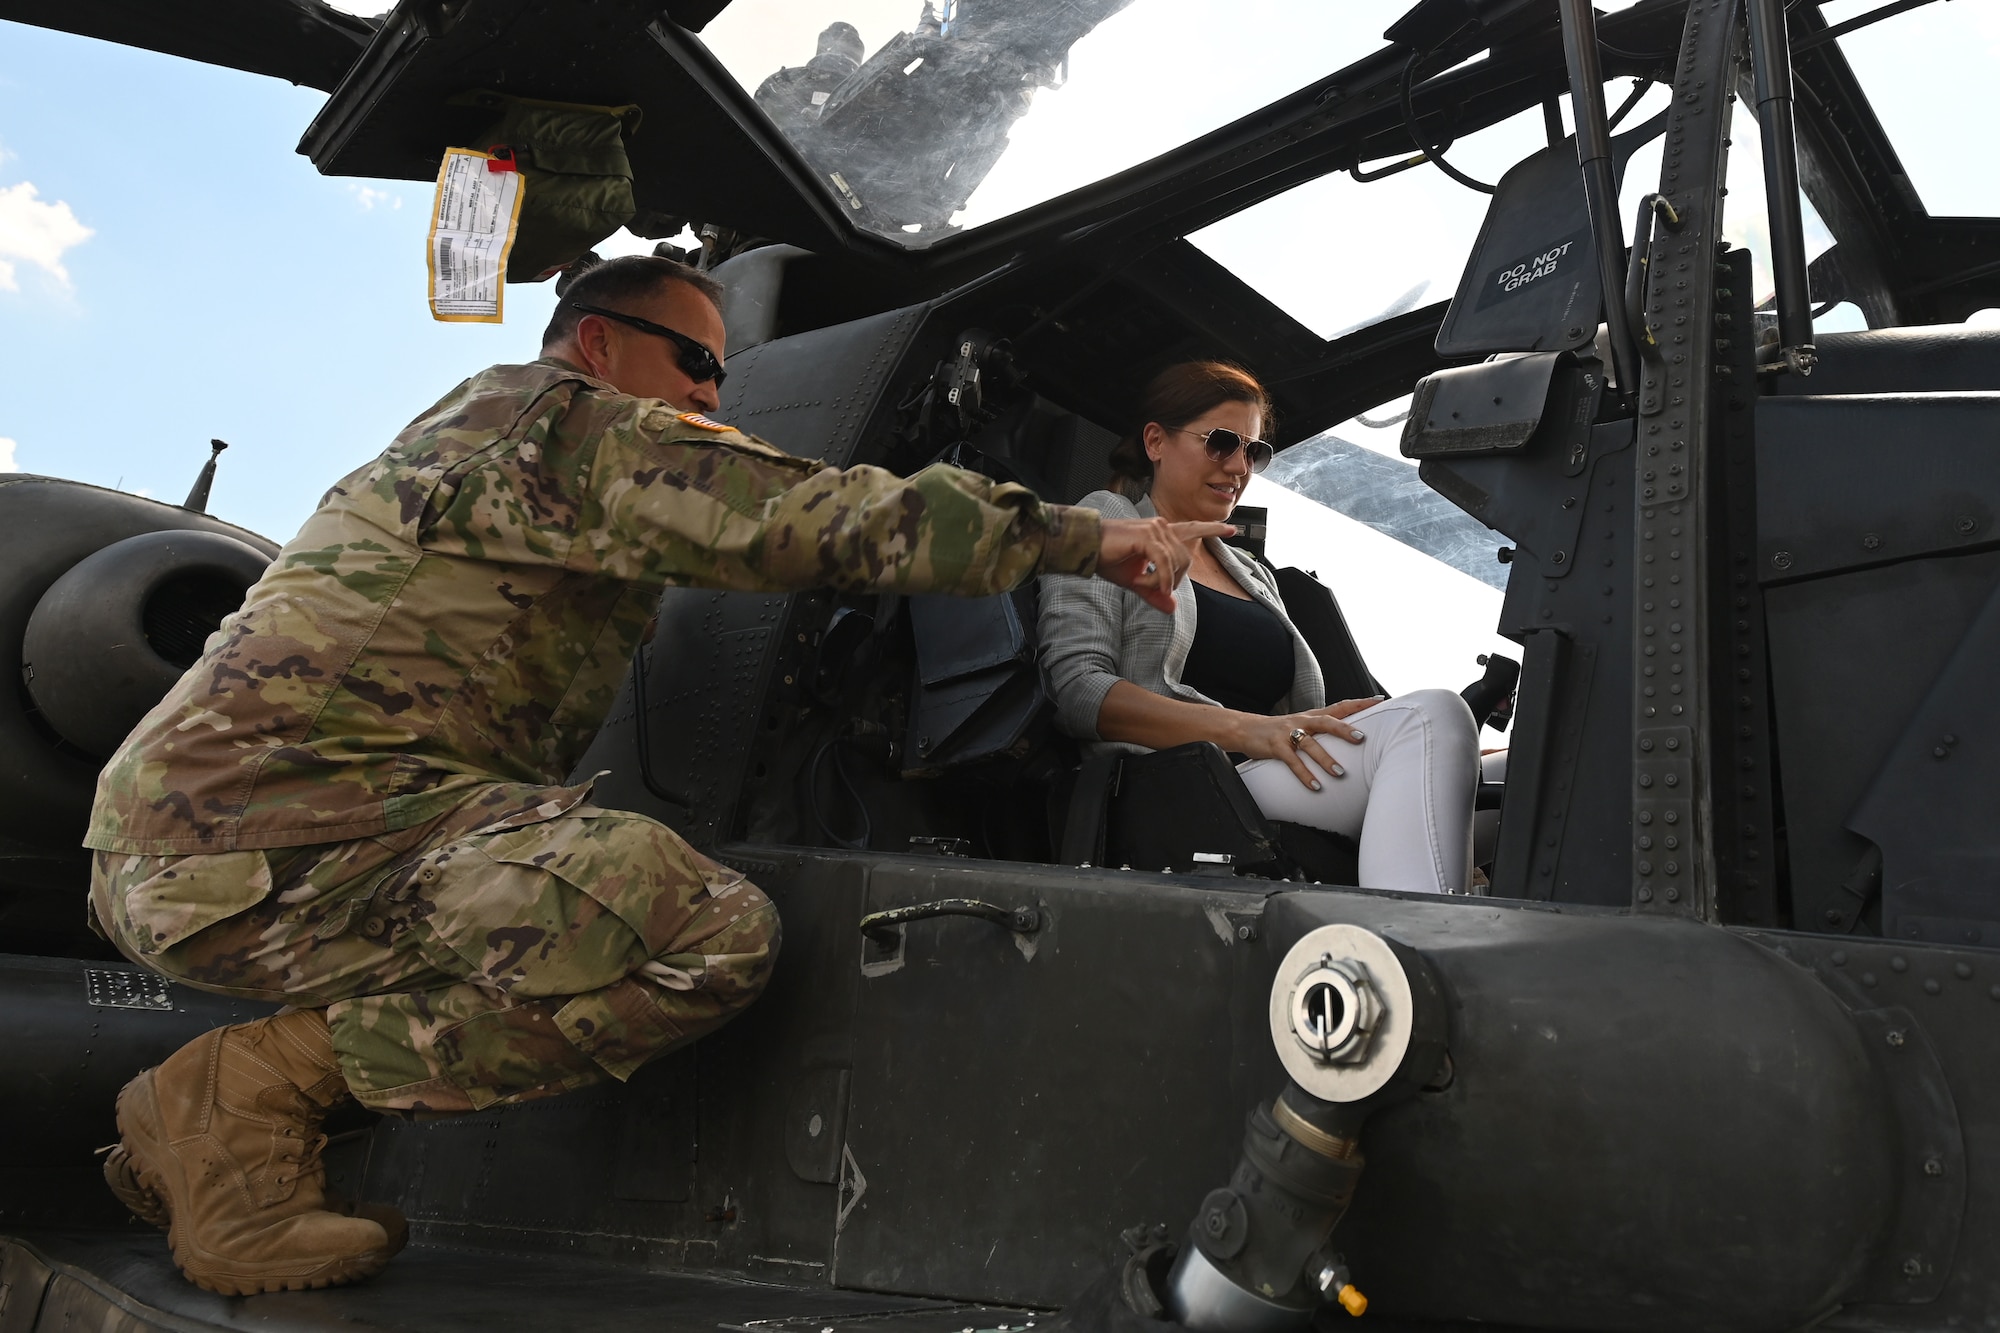 U.S. Rep. Nancy Mace from Charleston, South Carolina speaks with South Carolina National Guard senior leadership during her visit to McEntire Joint National Guard Base, South Carolina Aug.19, 2021. U.S. Army Col. John McElveen, 59th Troop Command commander provides Mace a close-up inspection of an AH-64 Apache helicopter. The purpose of her visit is to meet with South Carolina National Guard leadership to discuss the current state of the South Carolina National Guard and future endeavors for the organization as well as a familiarization of the base and the capabilities of the units housed there. (U.S. Air National Guard photo by Senior Master Sgt. Edward Snyder, 169th Fighter Wing Public Affairs)